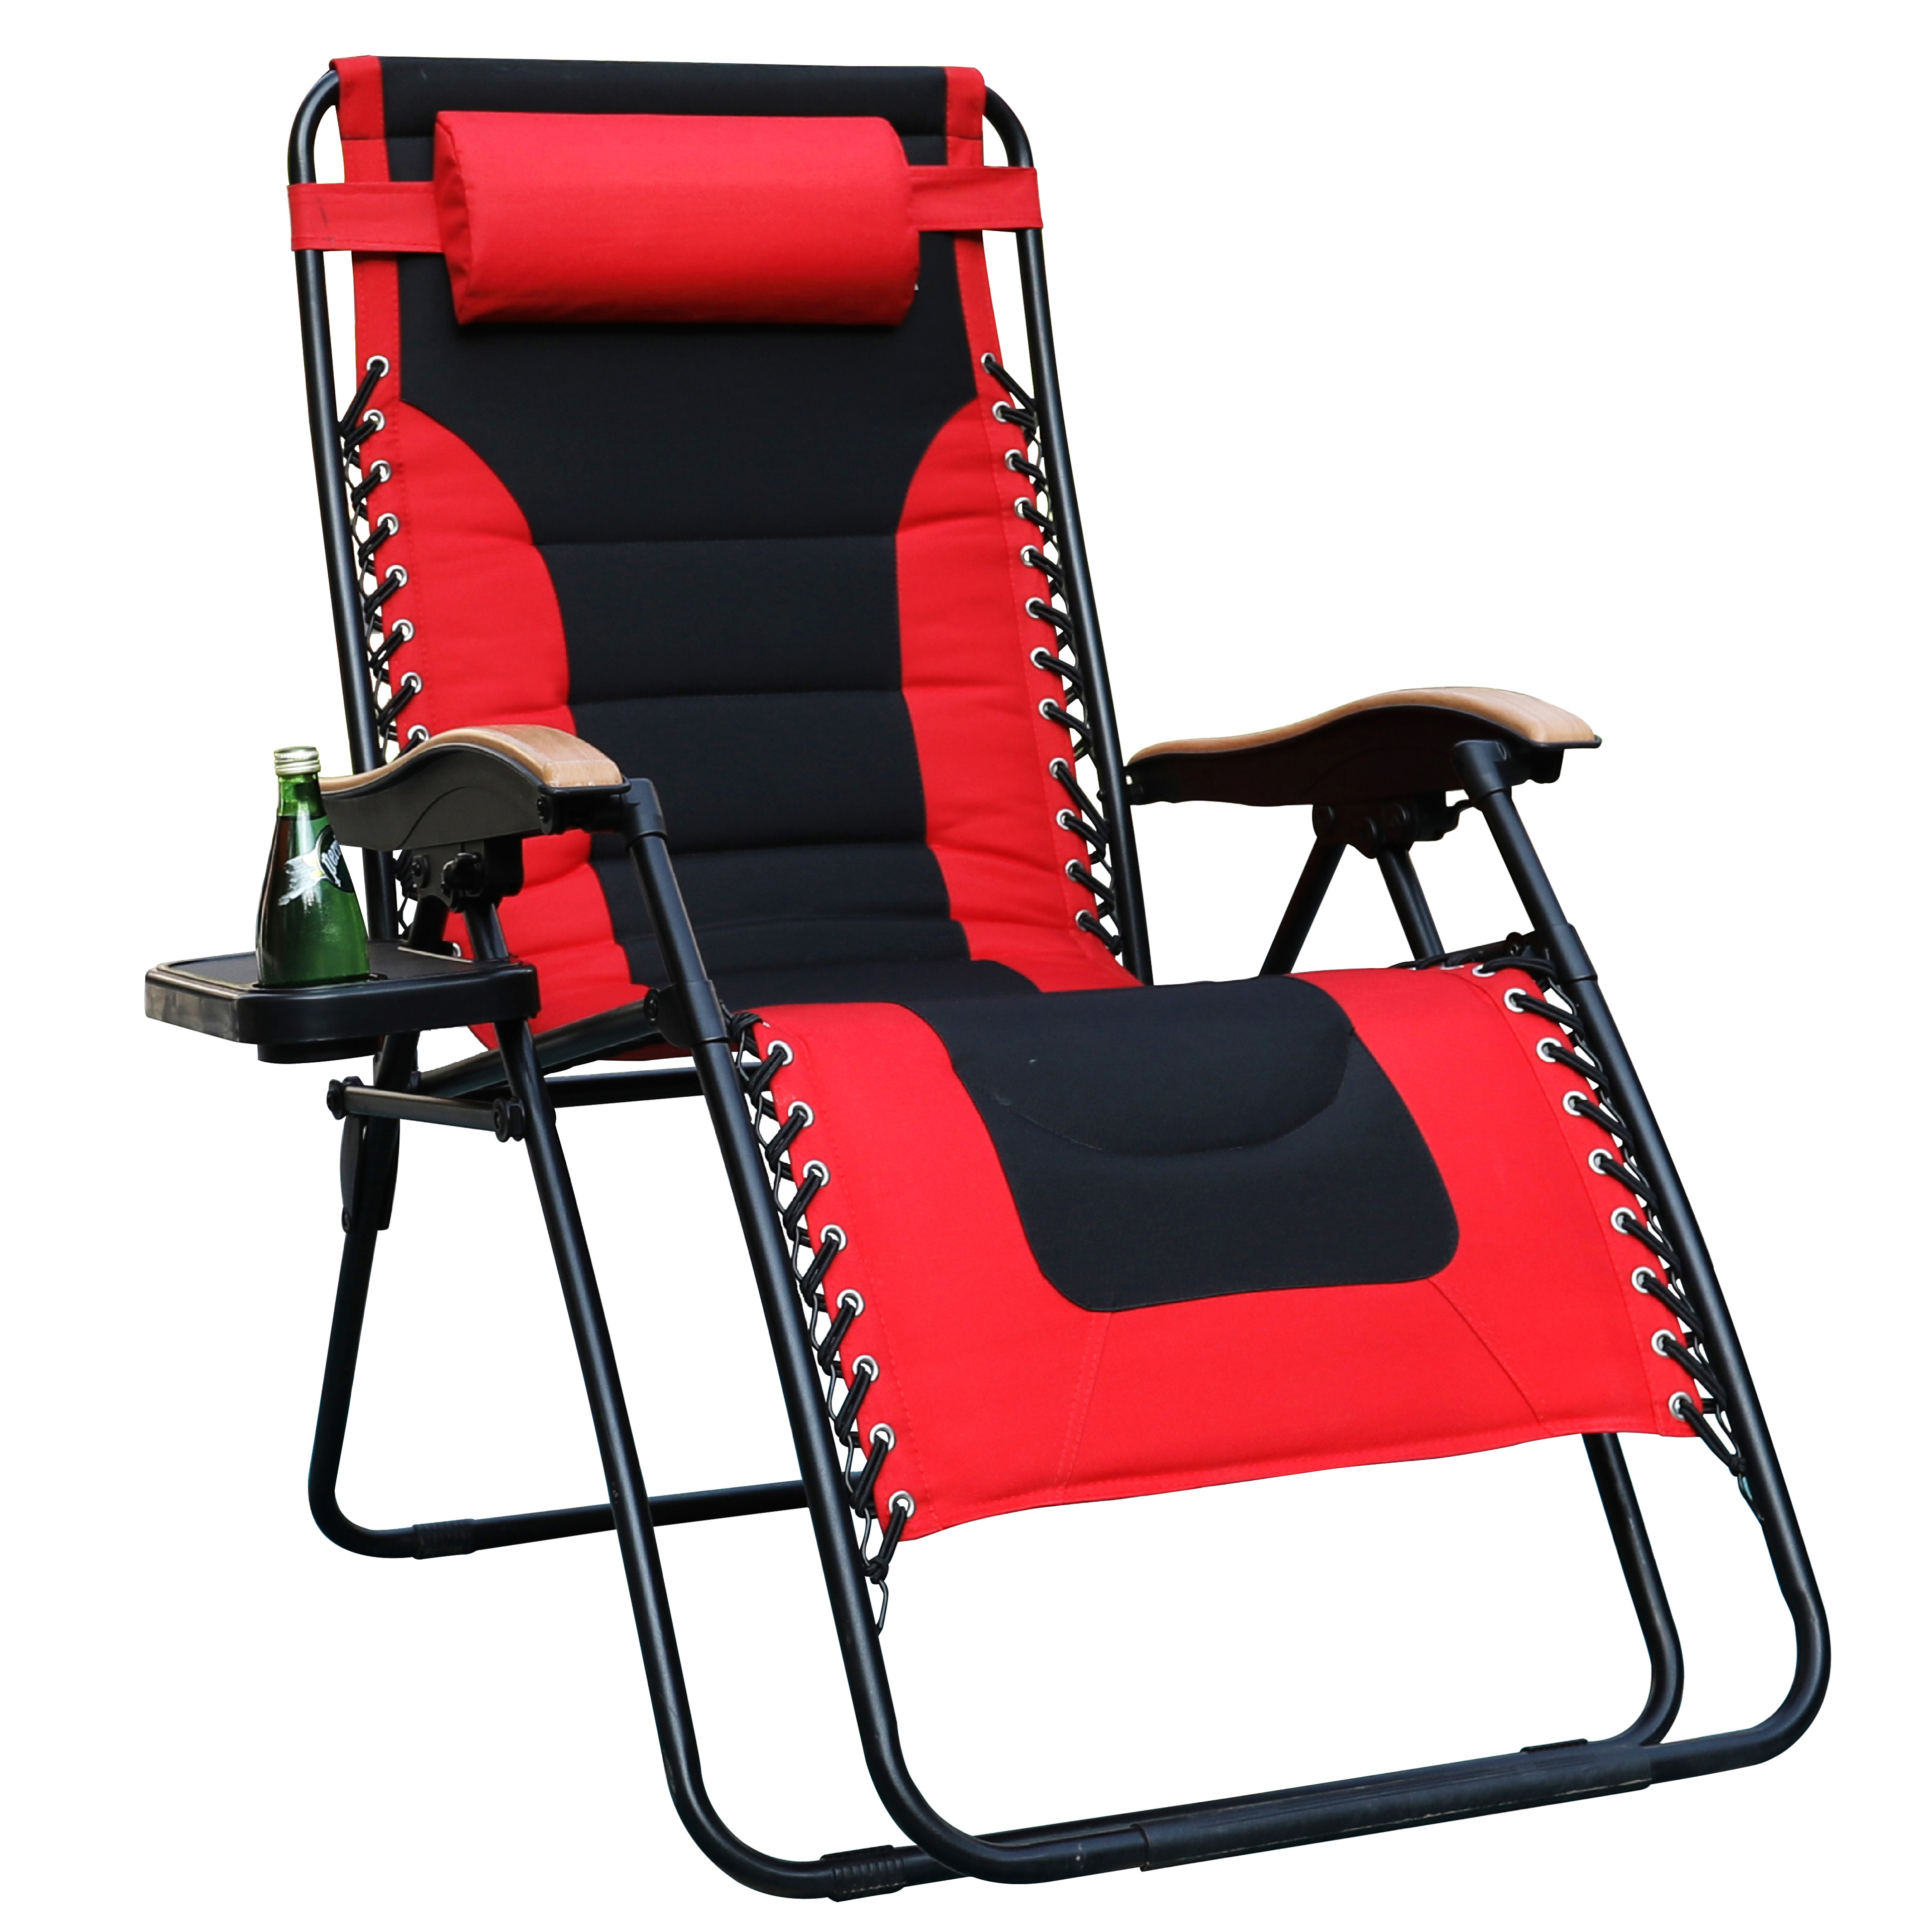 Padded Zero Gravity Lounge Chair Foldable Adjustable Reclining with Cup Holder